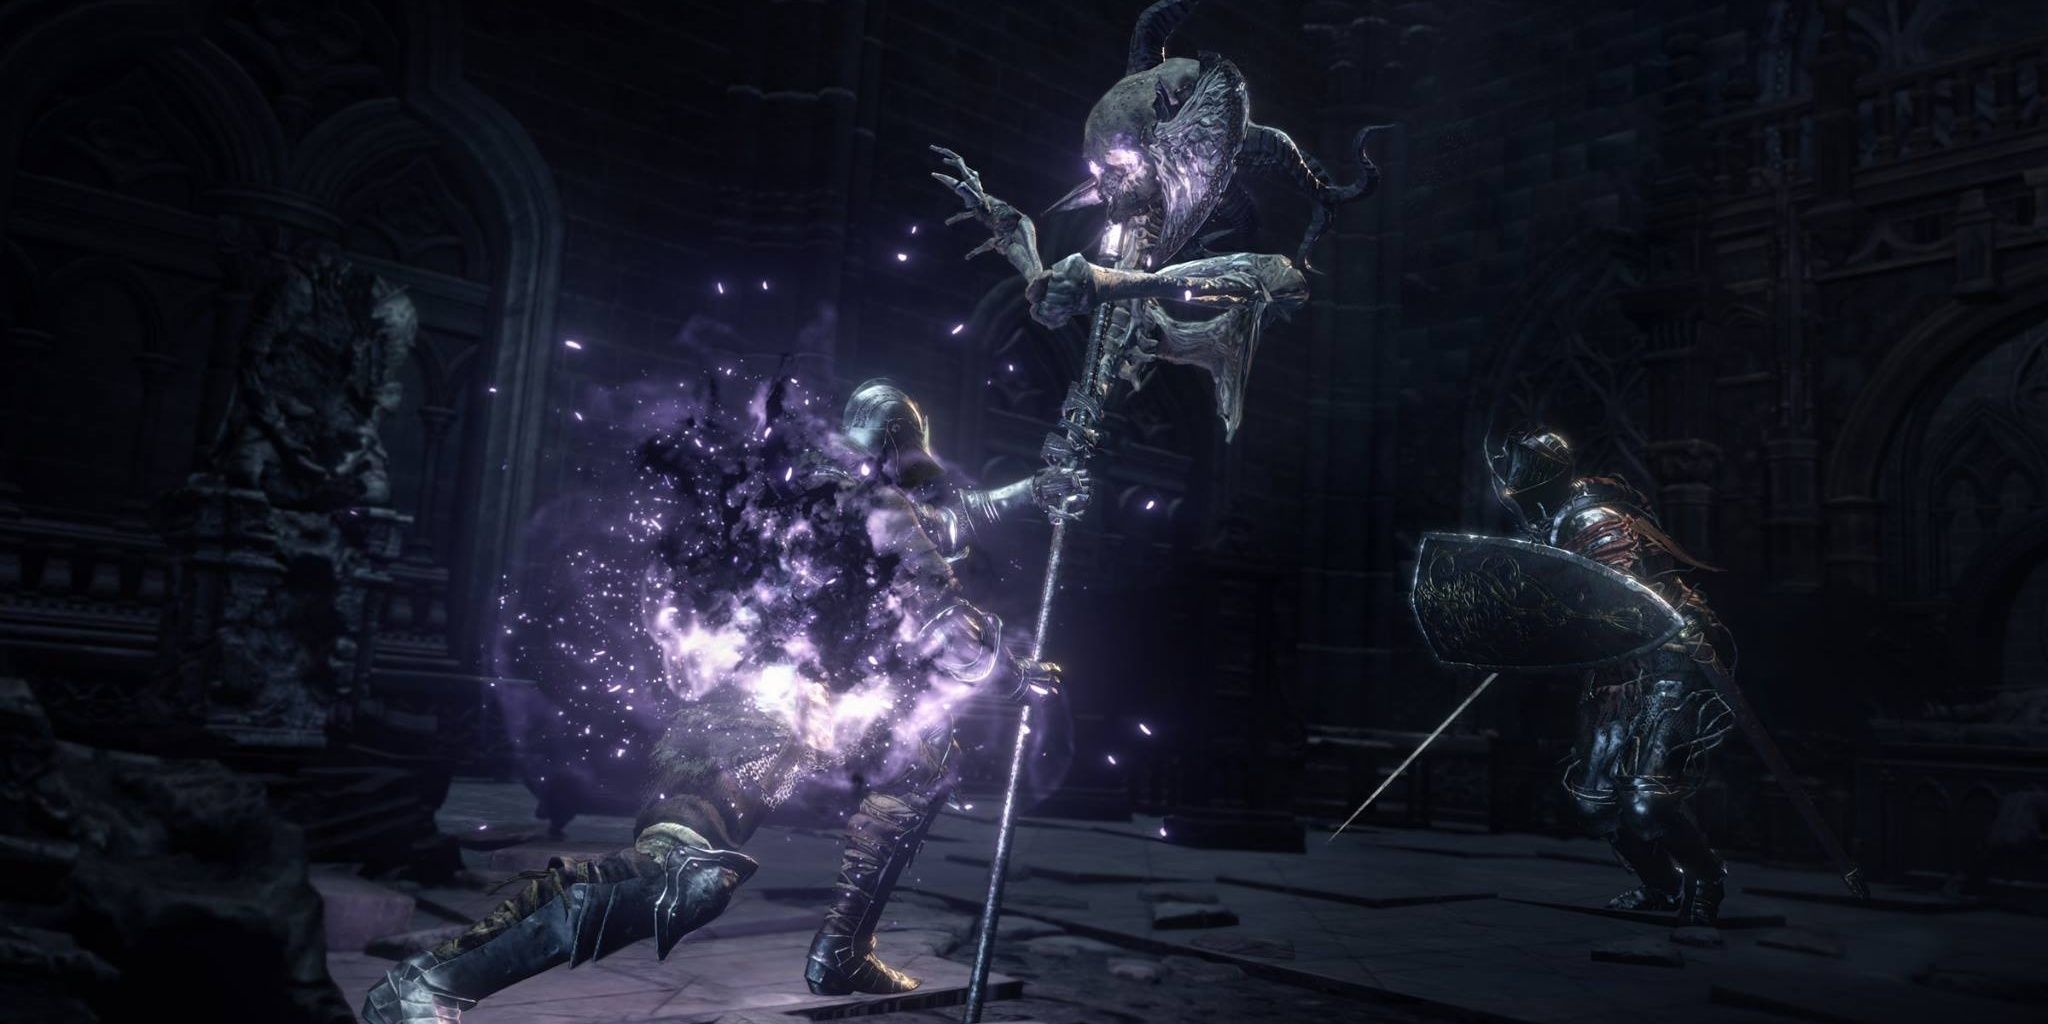 https://darksouls3.wiki.fextralife.com/Mad+King%27s+Folly